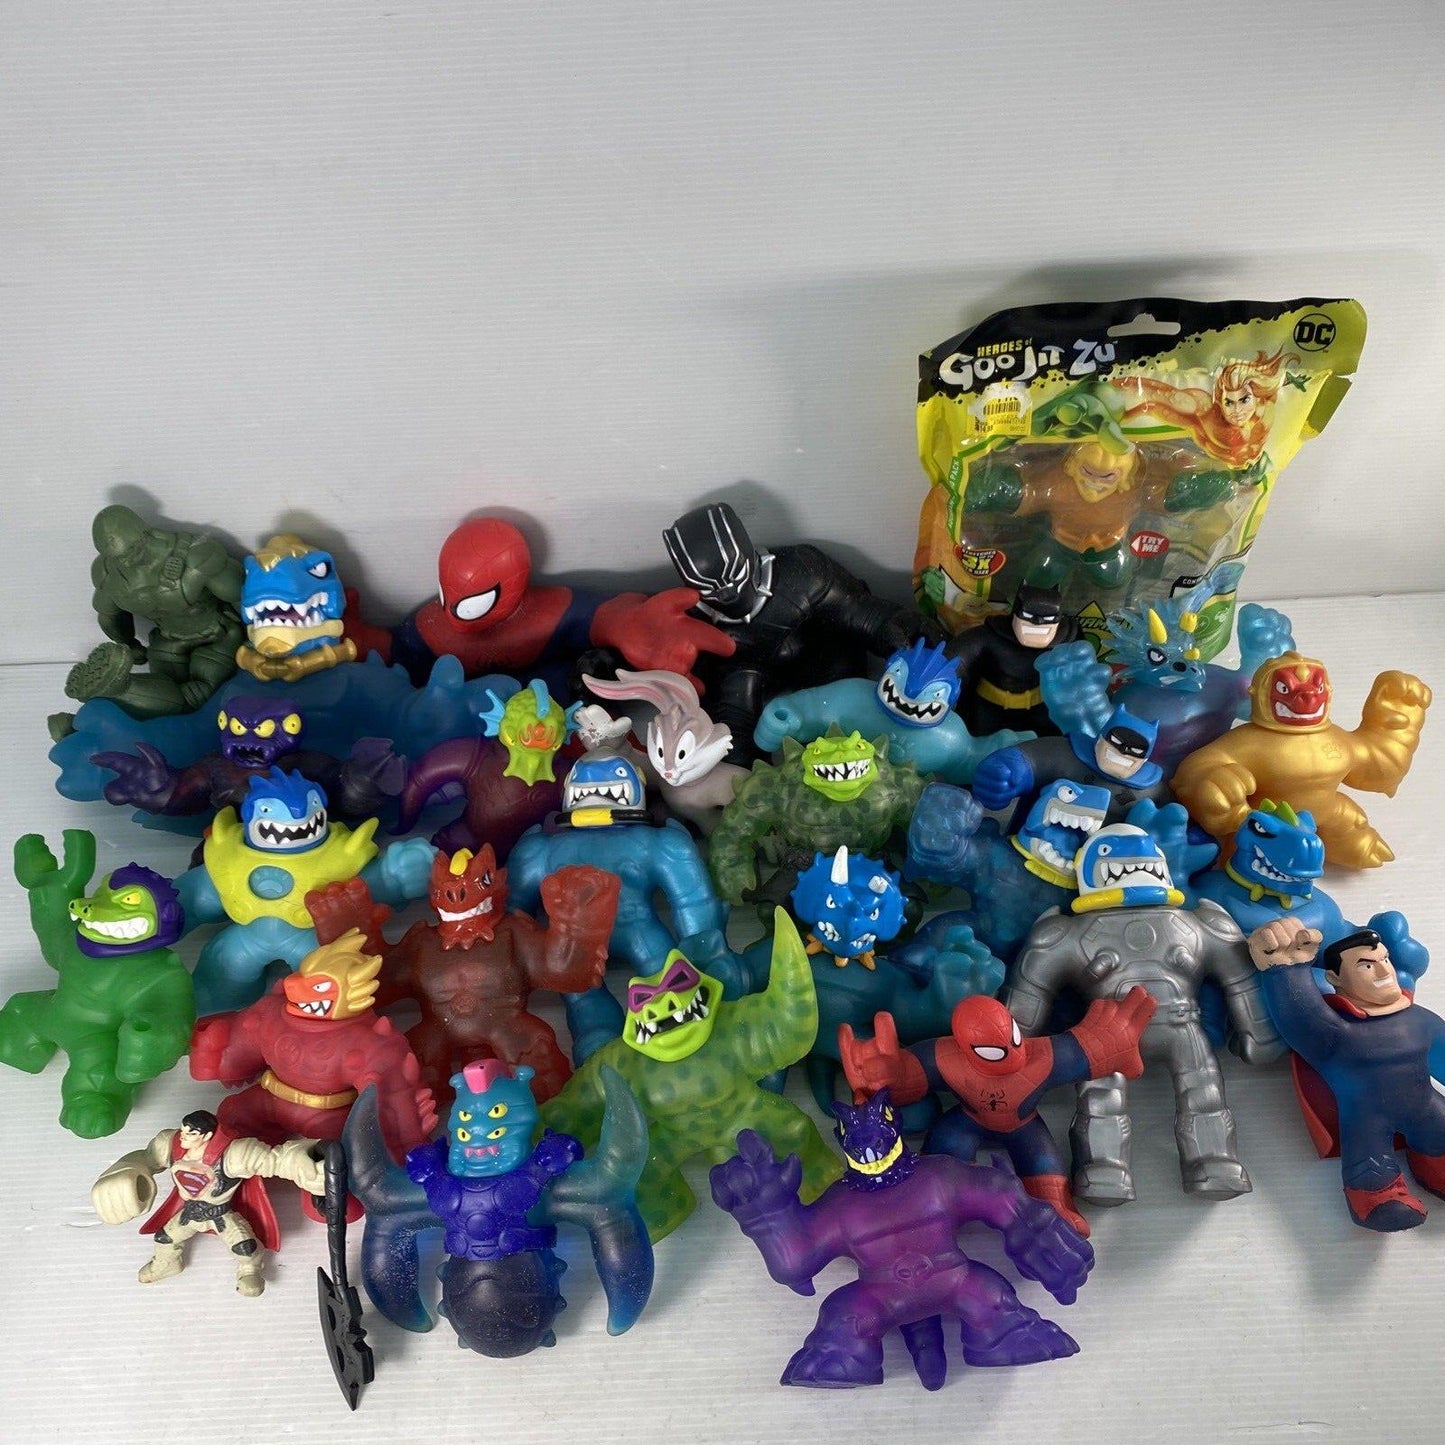 LOT 30 Moose Stretchy Squishy Goo Jit Zu Armstrong Hero Rubber Action Figures - Warehouse Toys